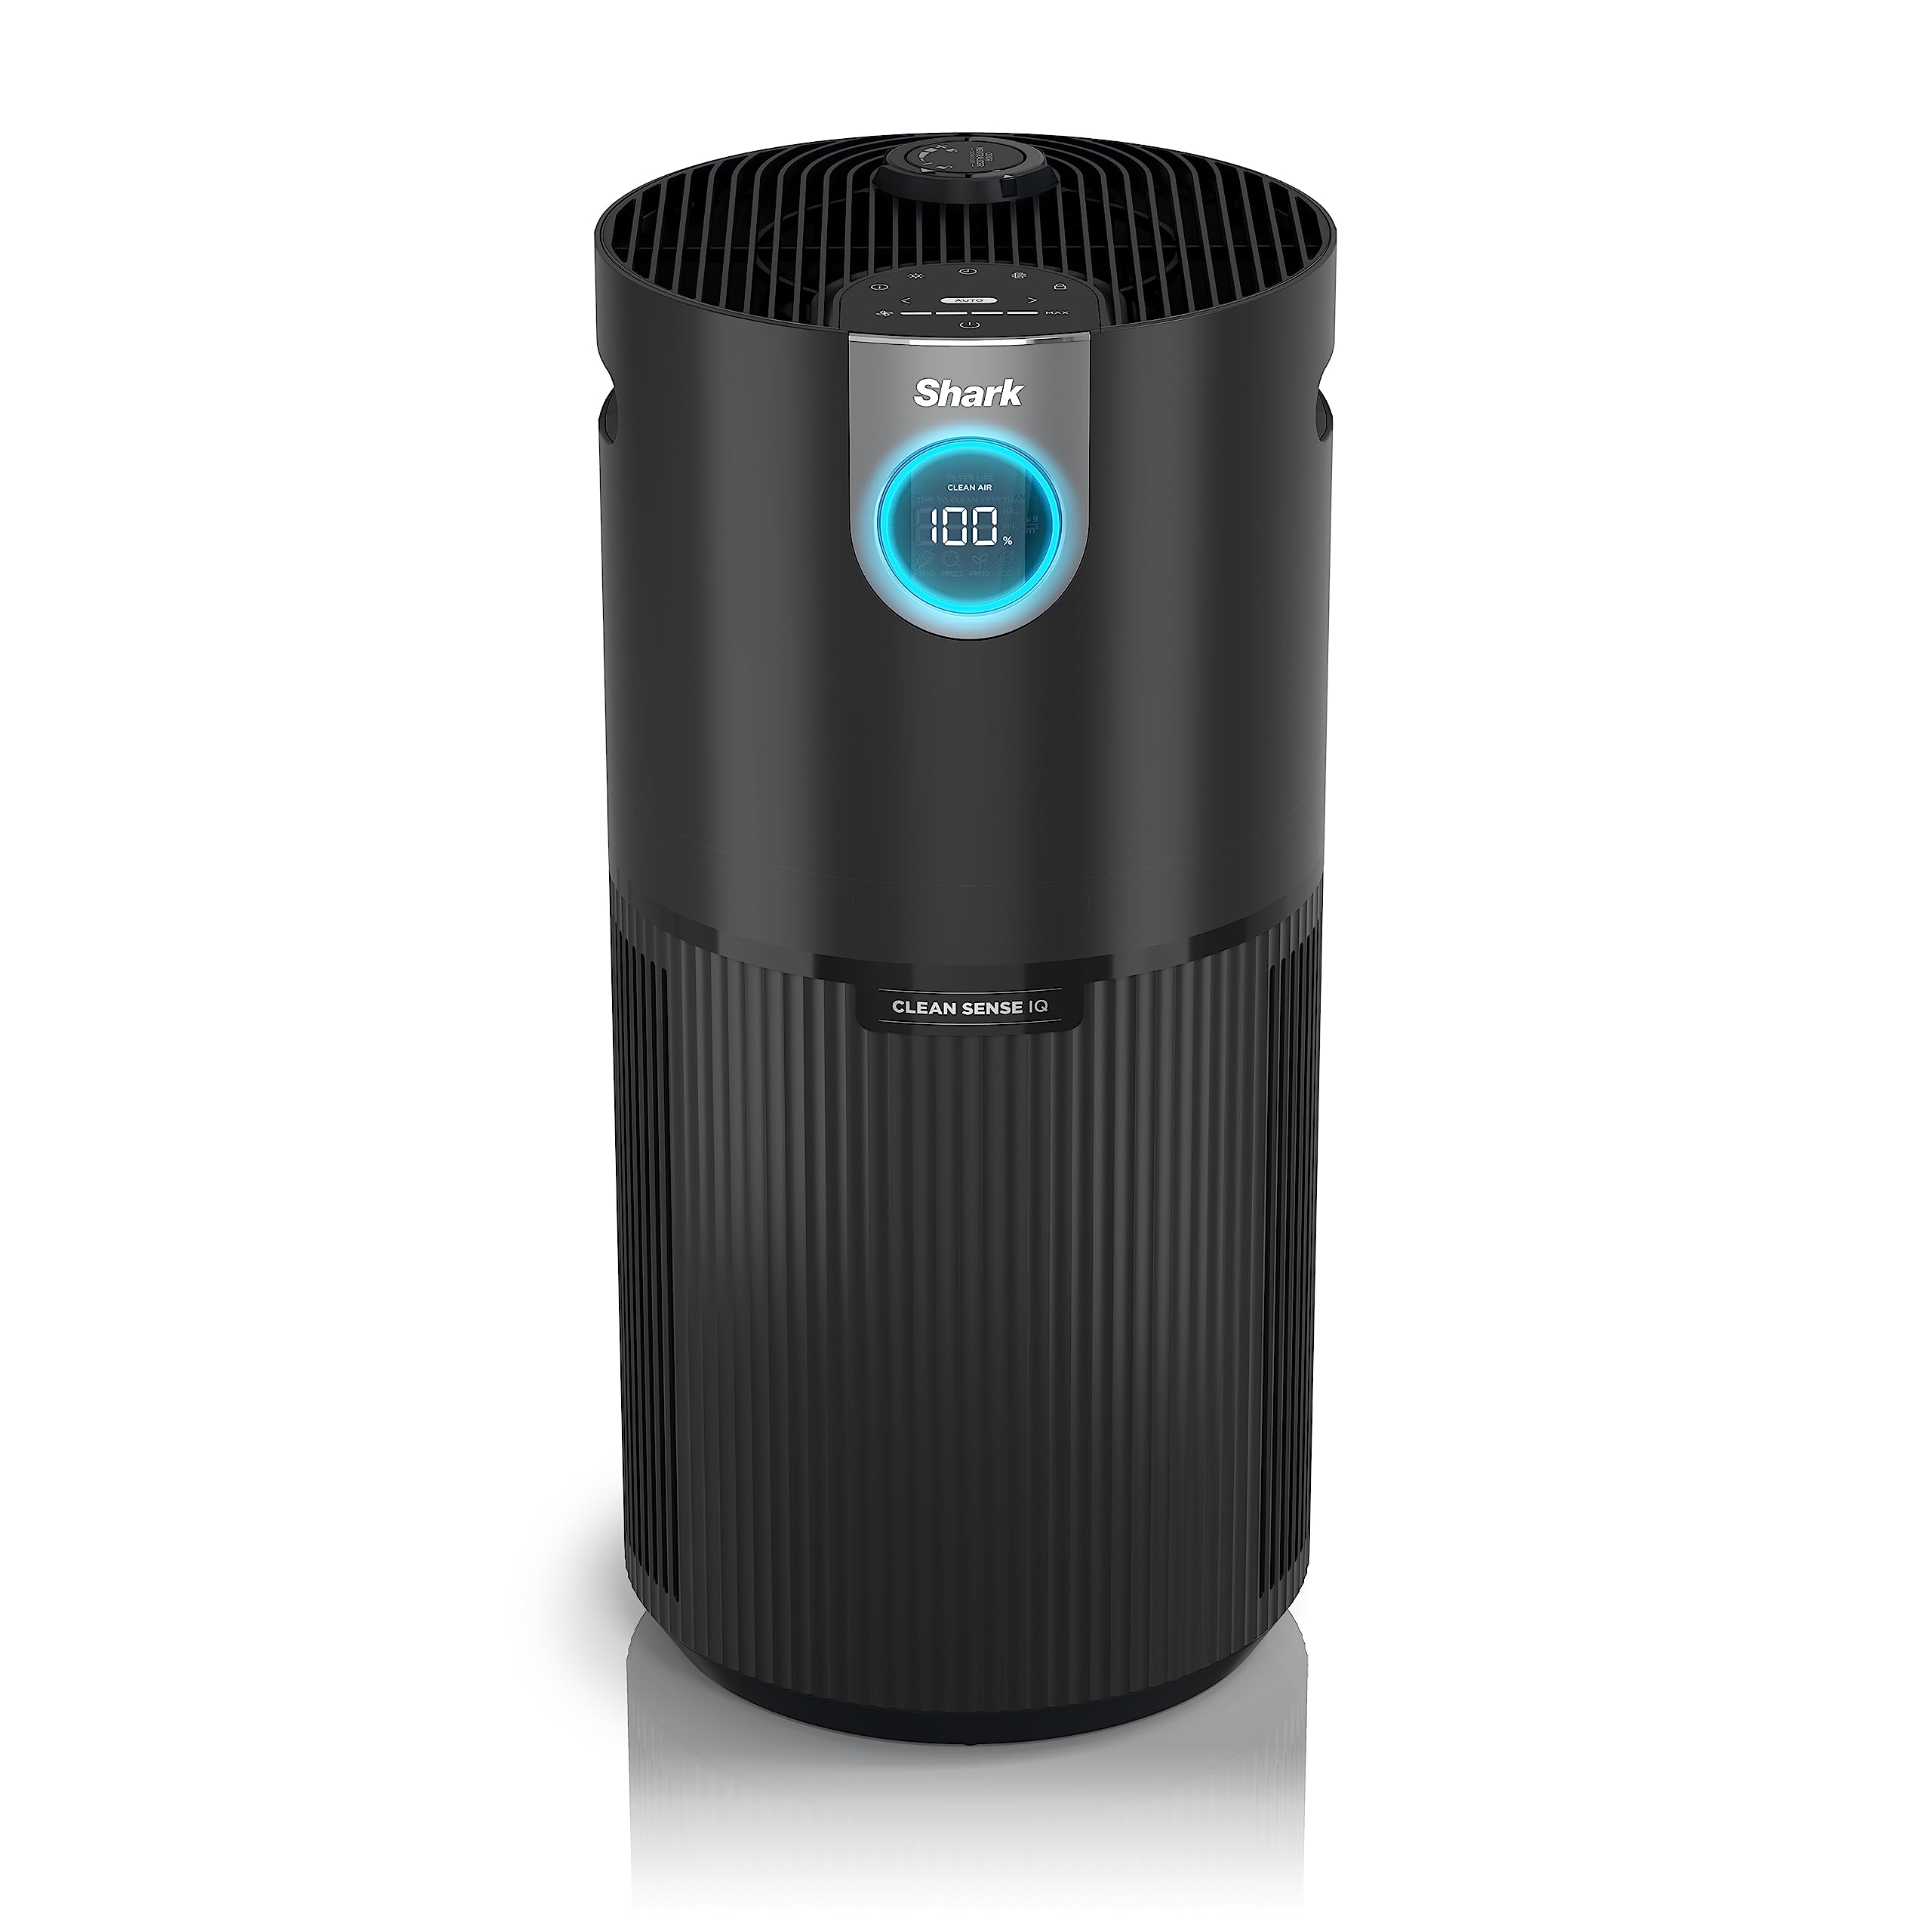 Shark HP232 Clean Sense Air Purifier MAX with Odor Neutralizer Technology, Allergies, HEPA Filter, 1200 Sq Ft, XL Room, Whole Home, Captures 99.98% of Particles, Allergens, Smells & More, Grey